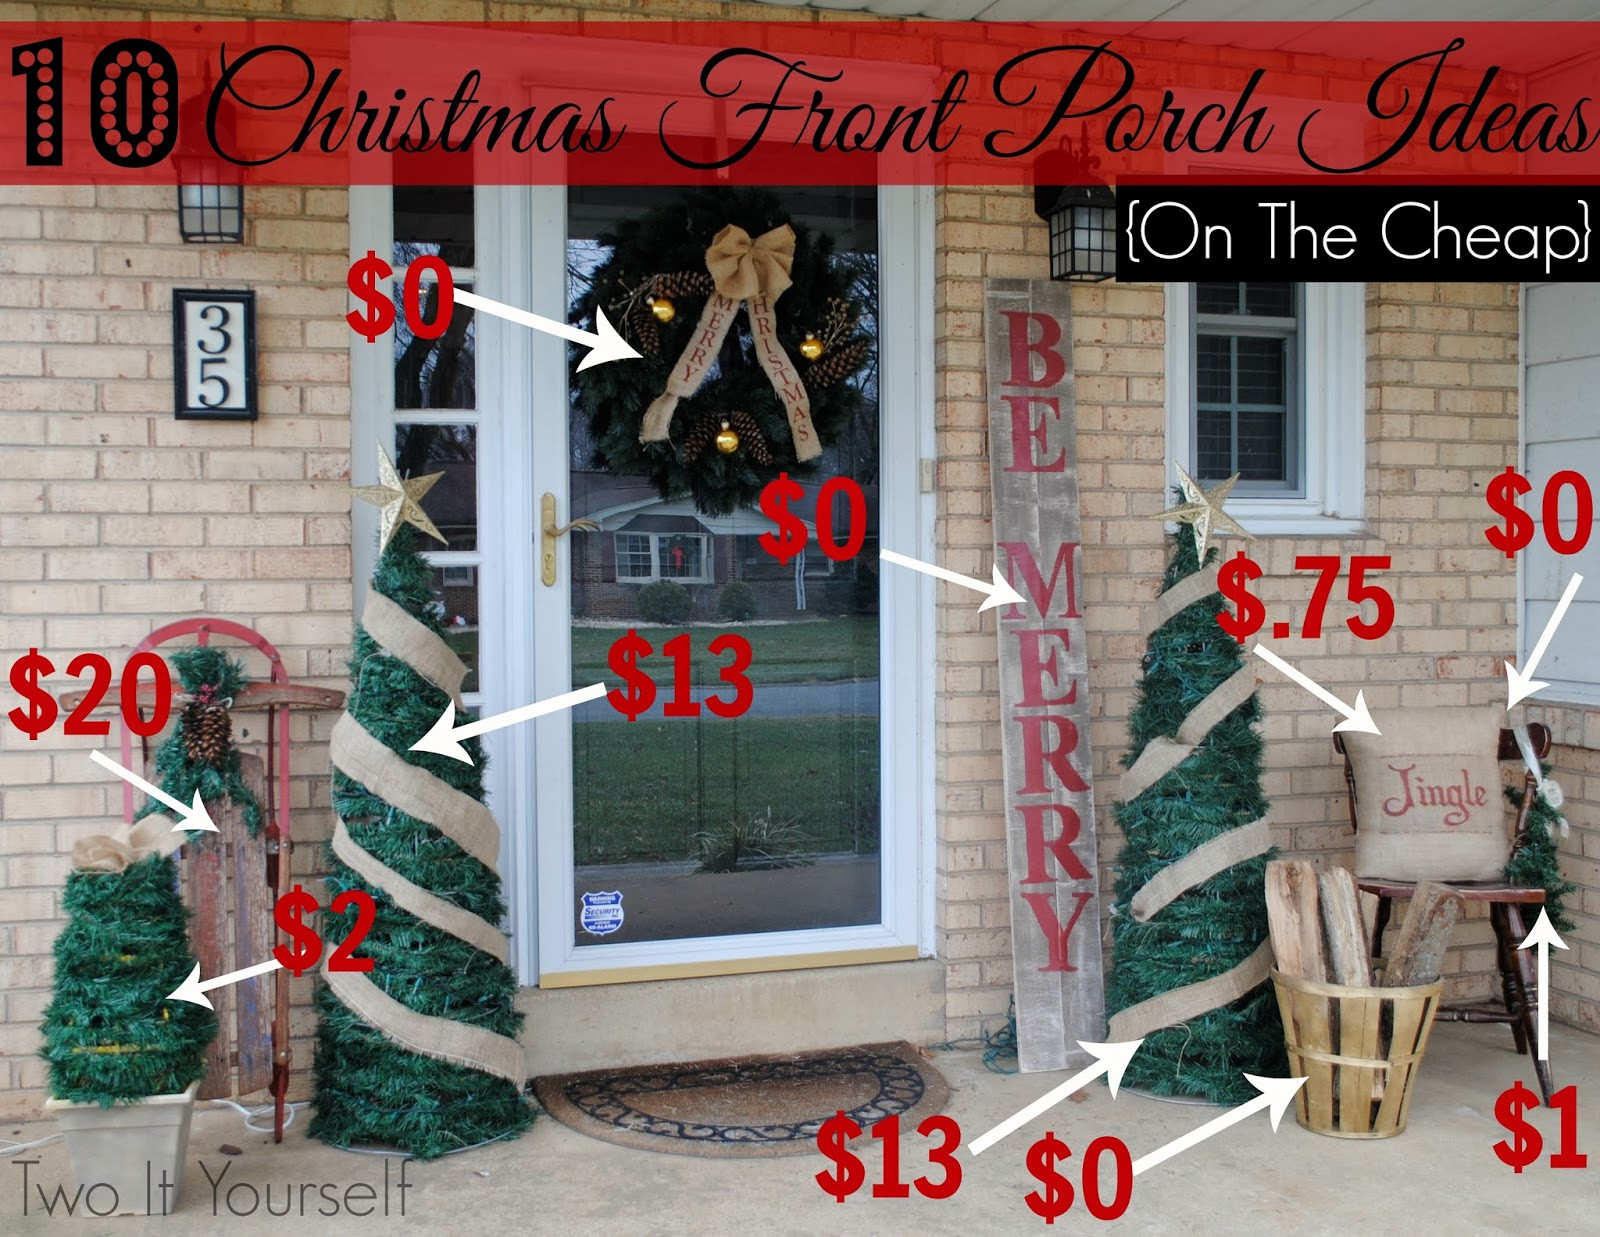 DIY Christmas Porch Decorations
 Two It Yourself 10 Christmas Front Porch Ideas The Cheap